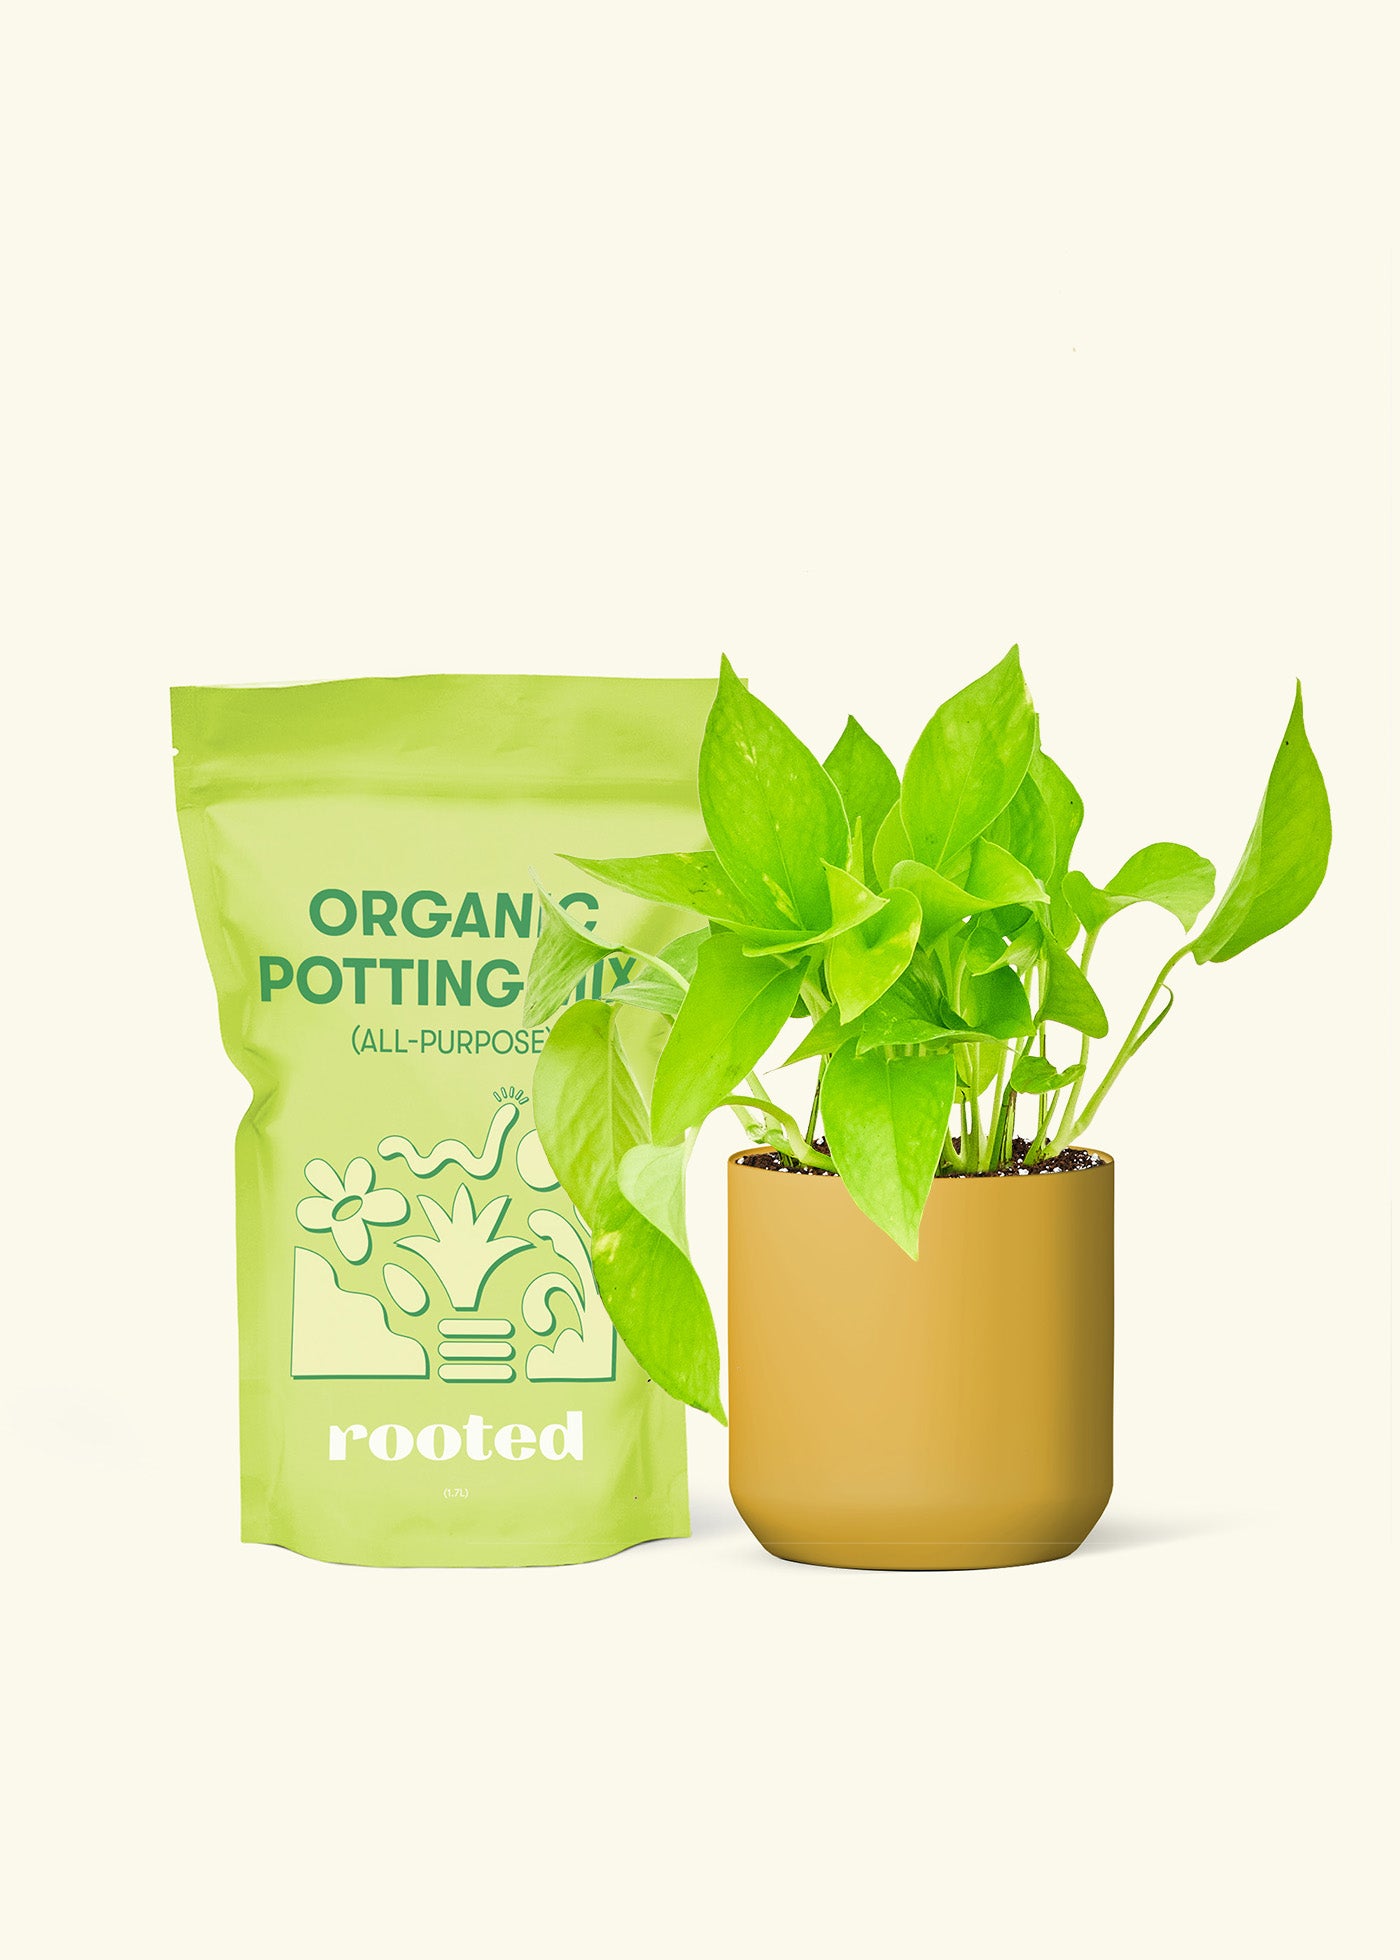 Small Golden Pothos in a mustard cylinder pot and a bag of soil.